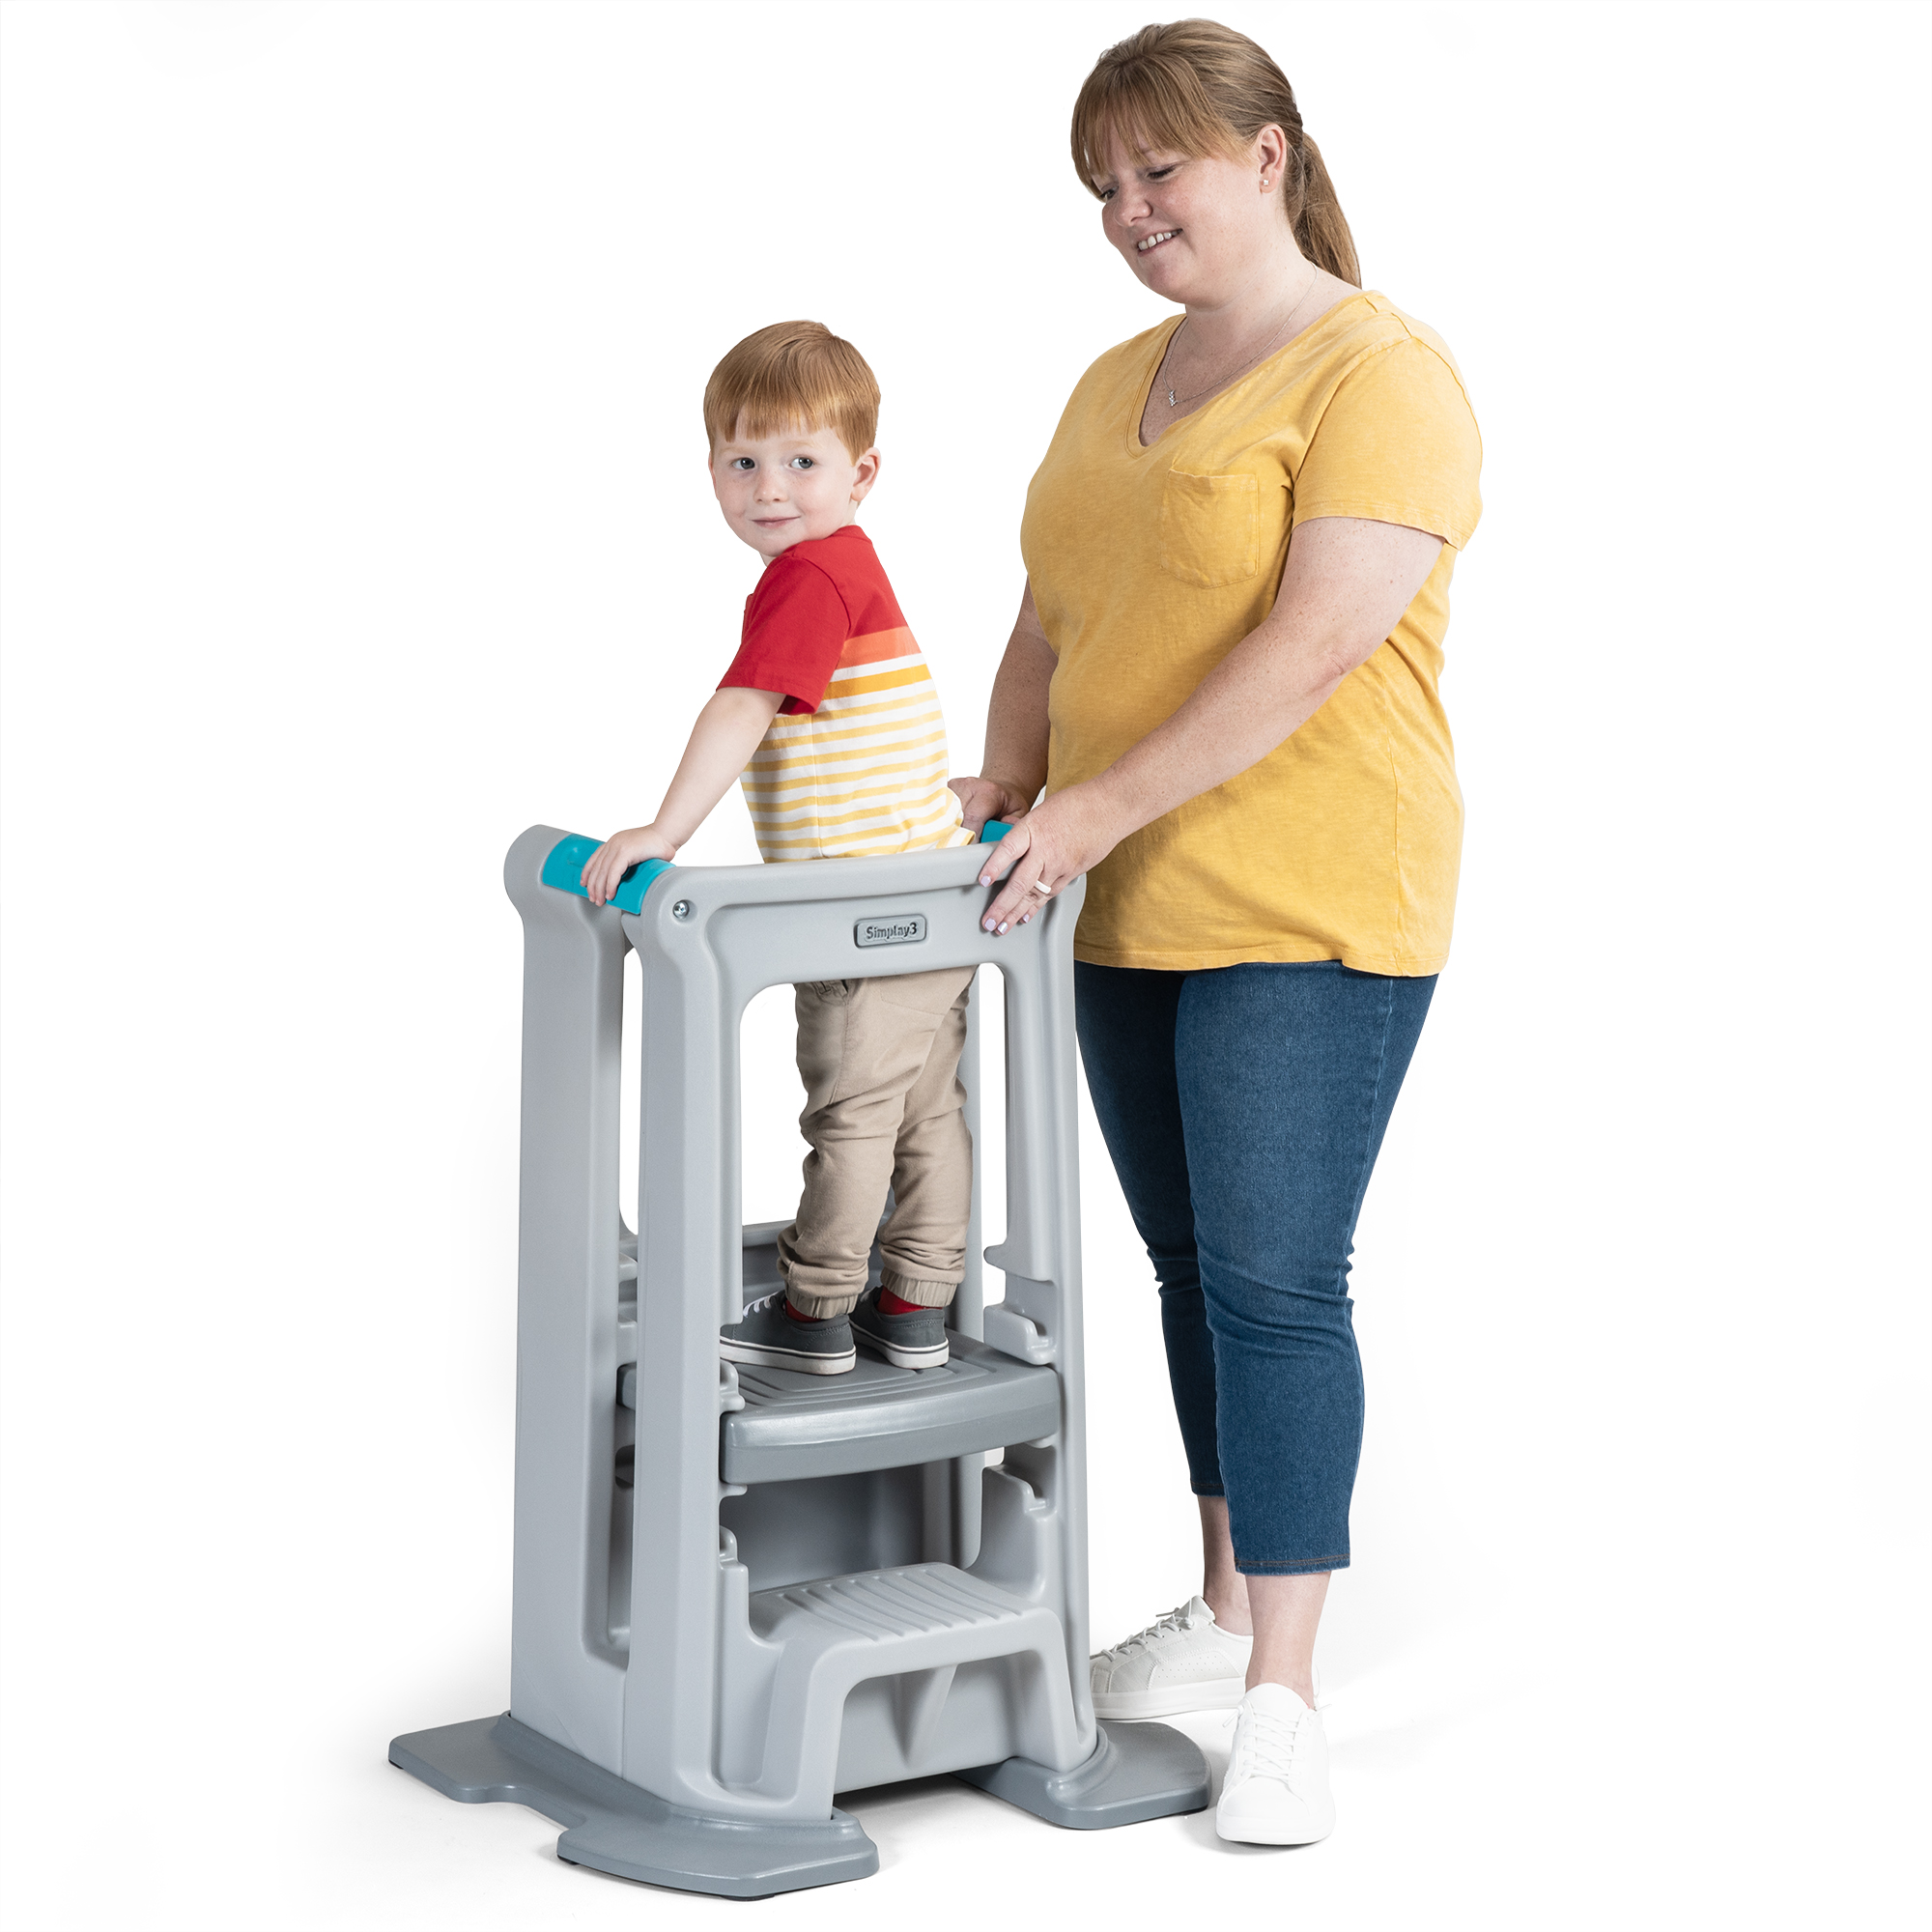 Toddler Tower Adjustable Stool by Simplay3